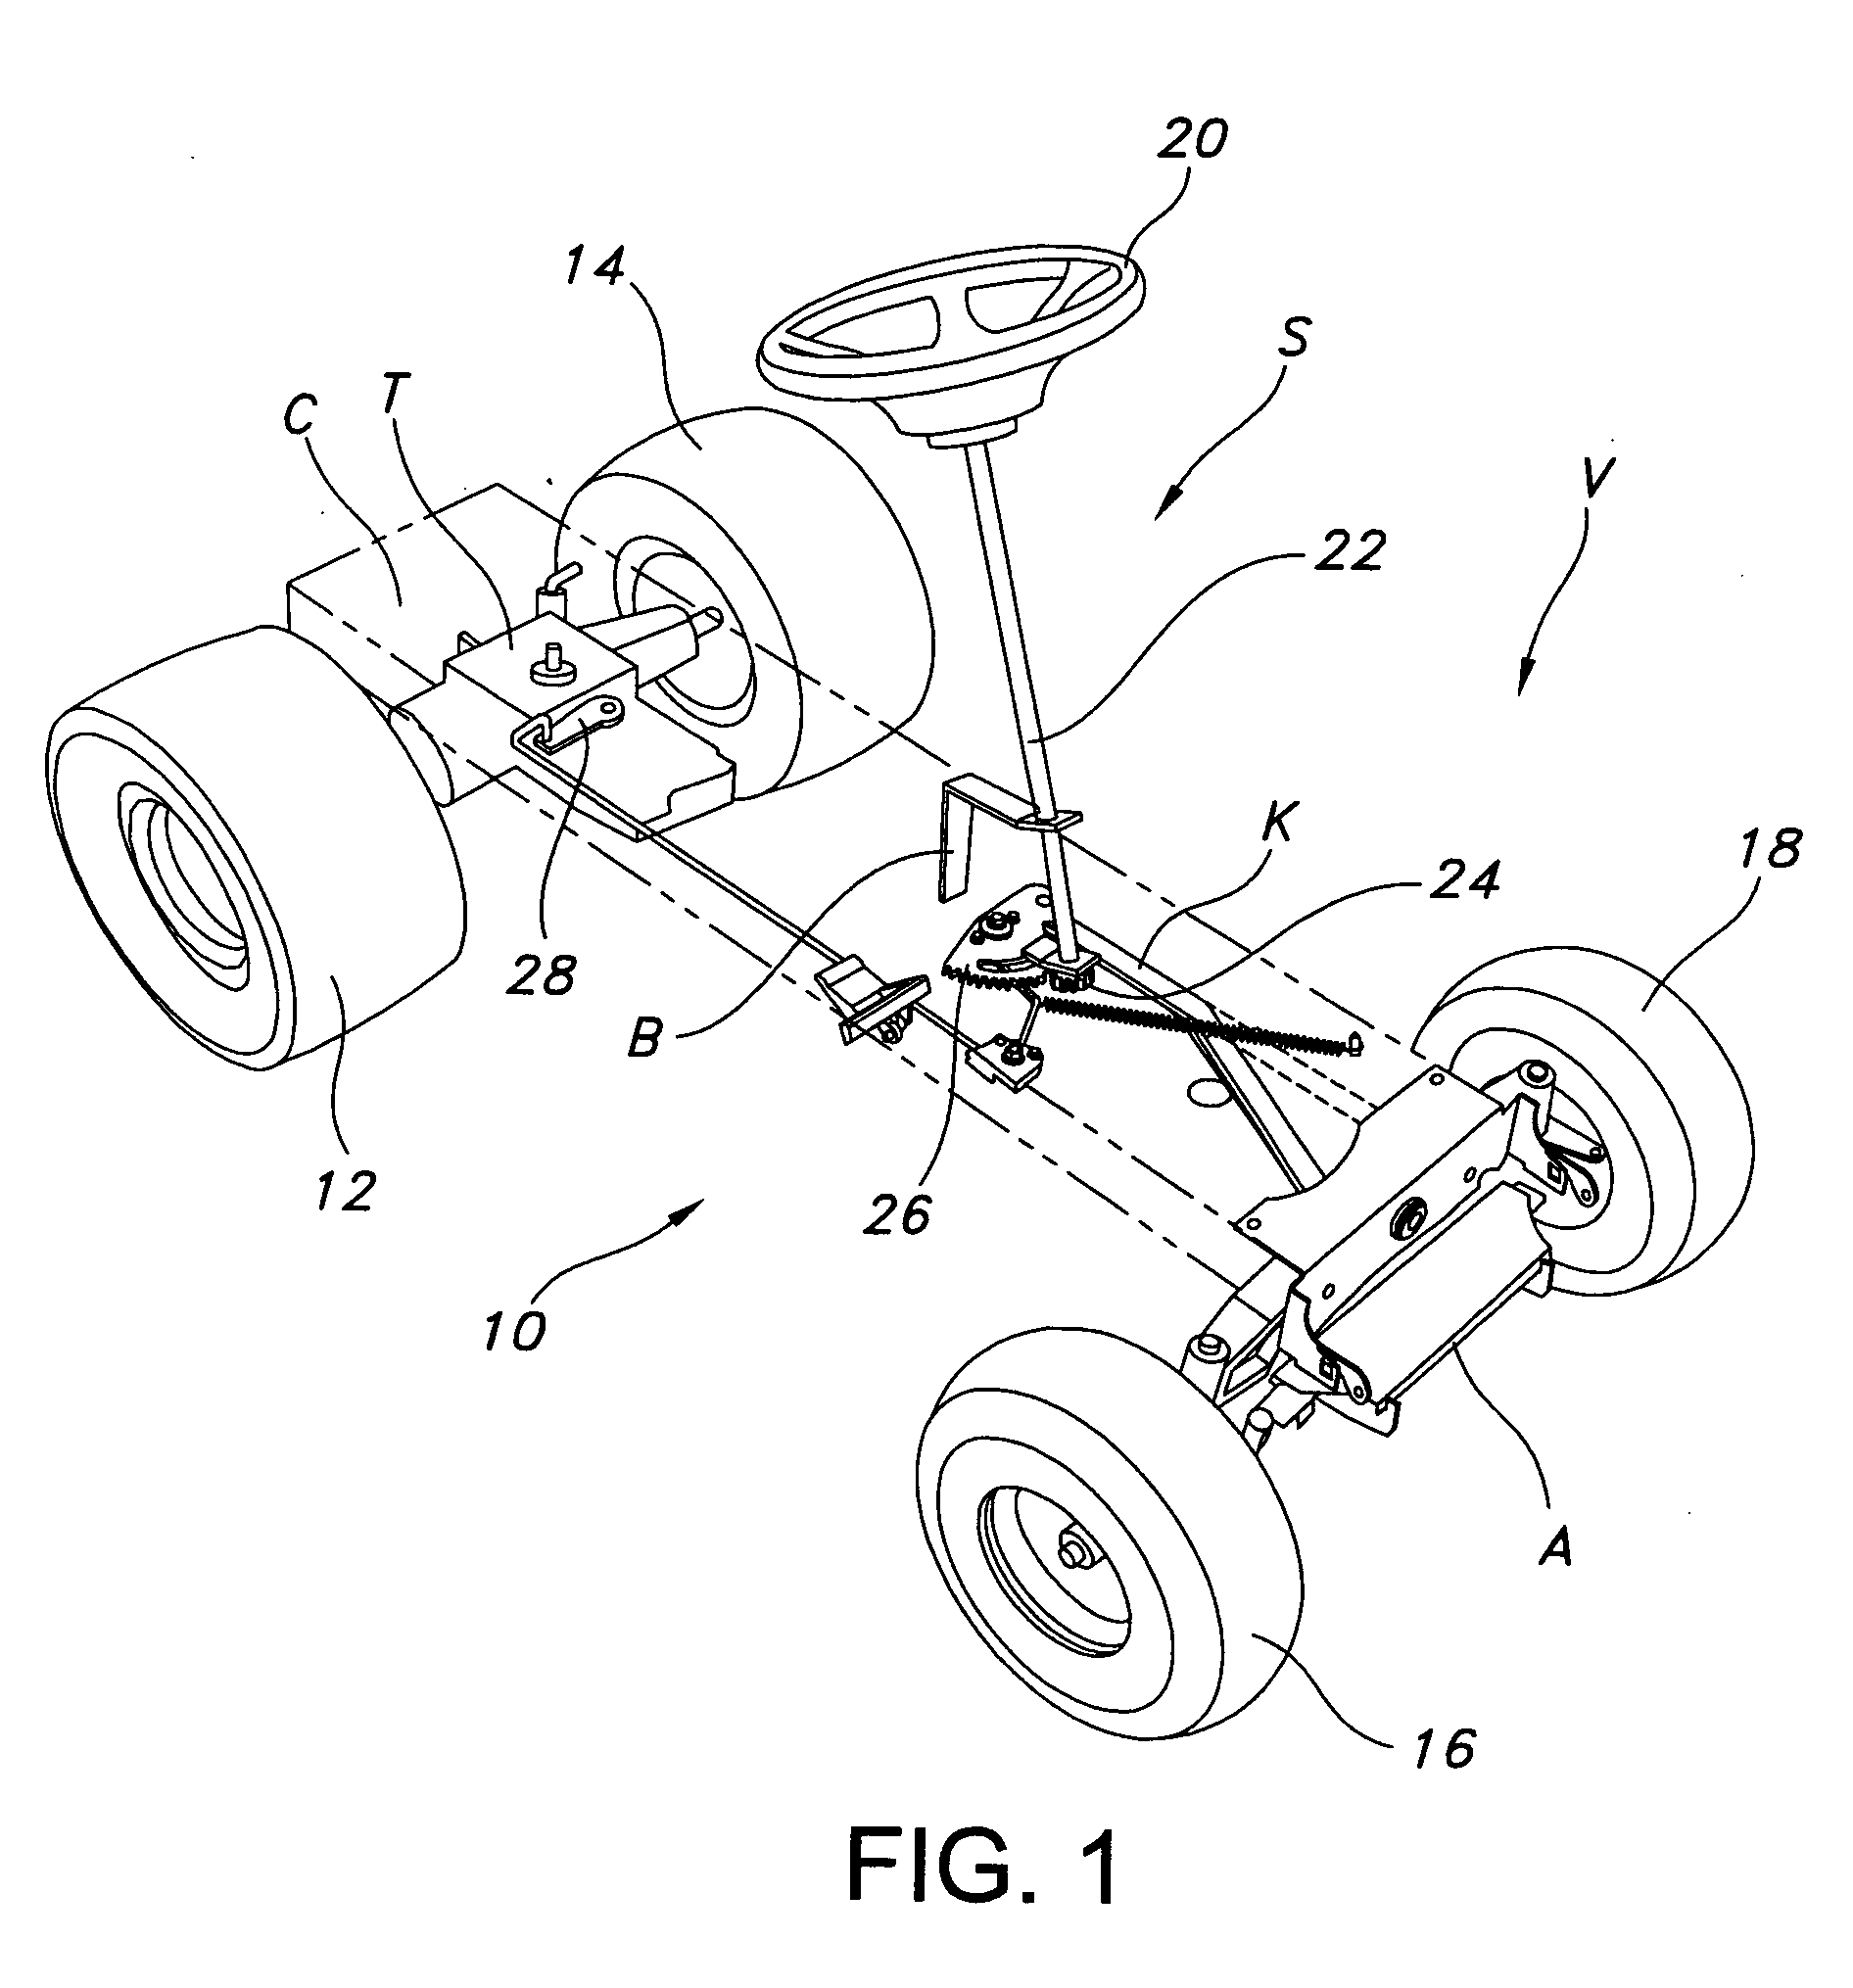 Vehicle control system with slow-in-turn capabilities and related method